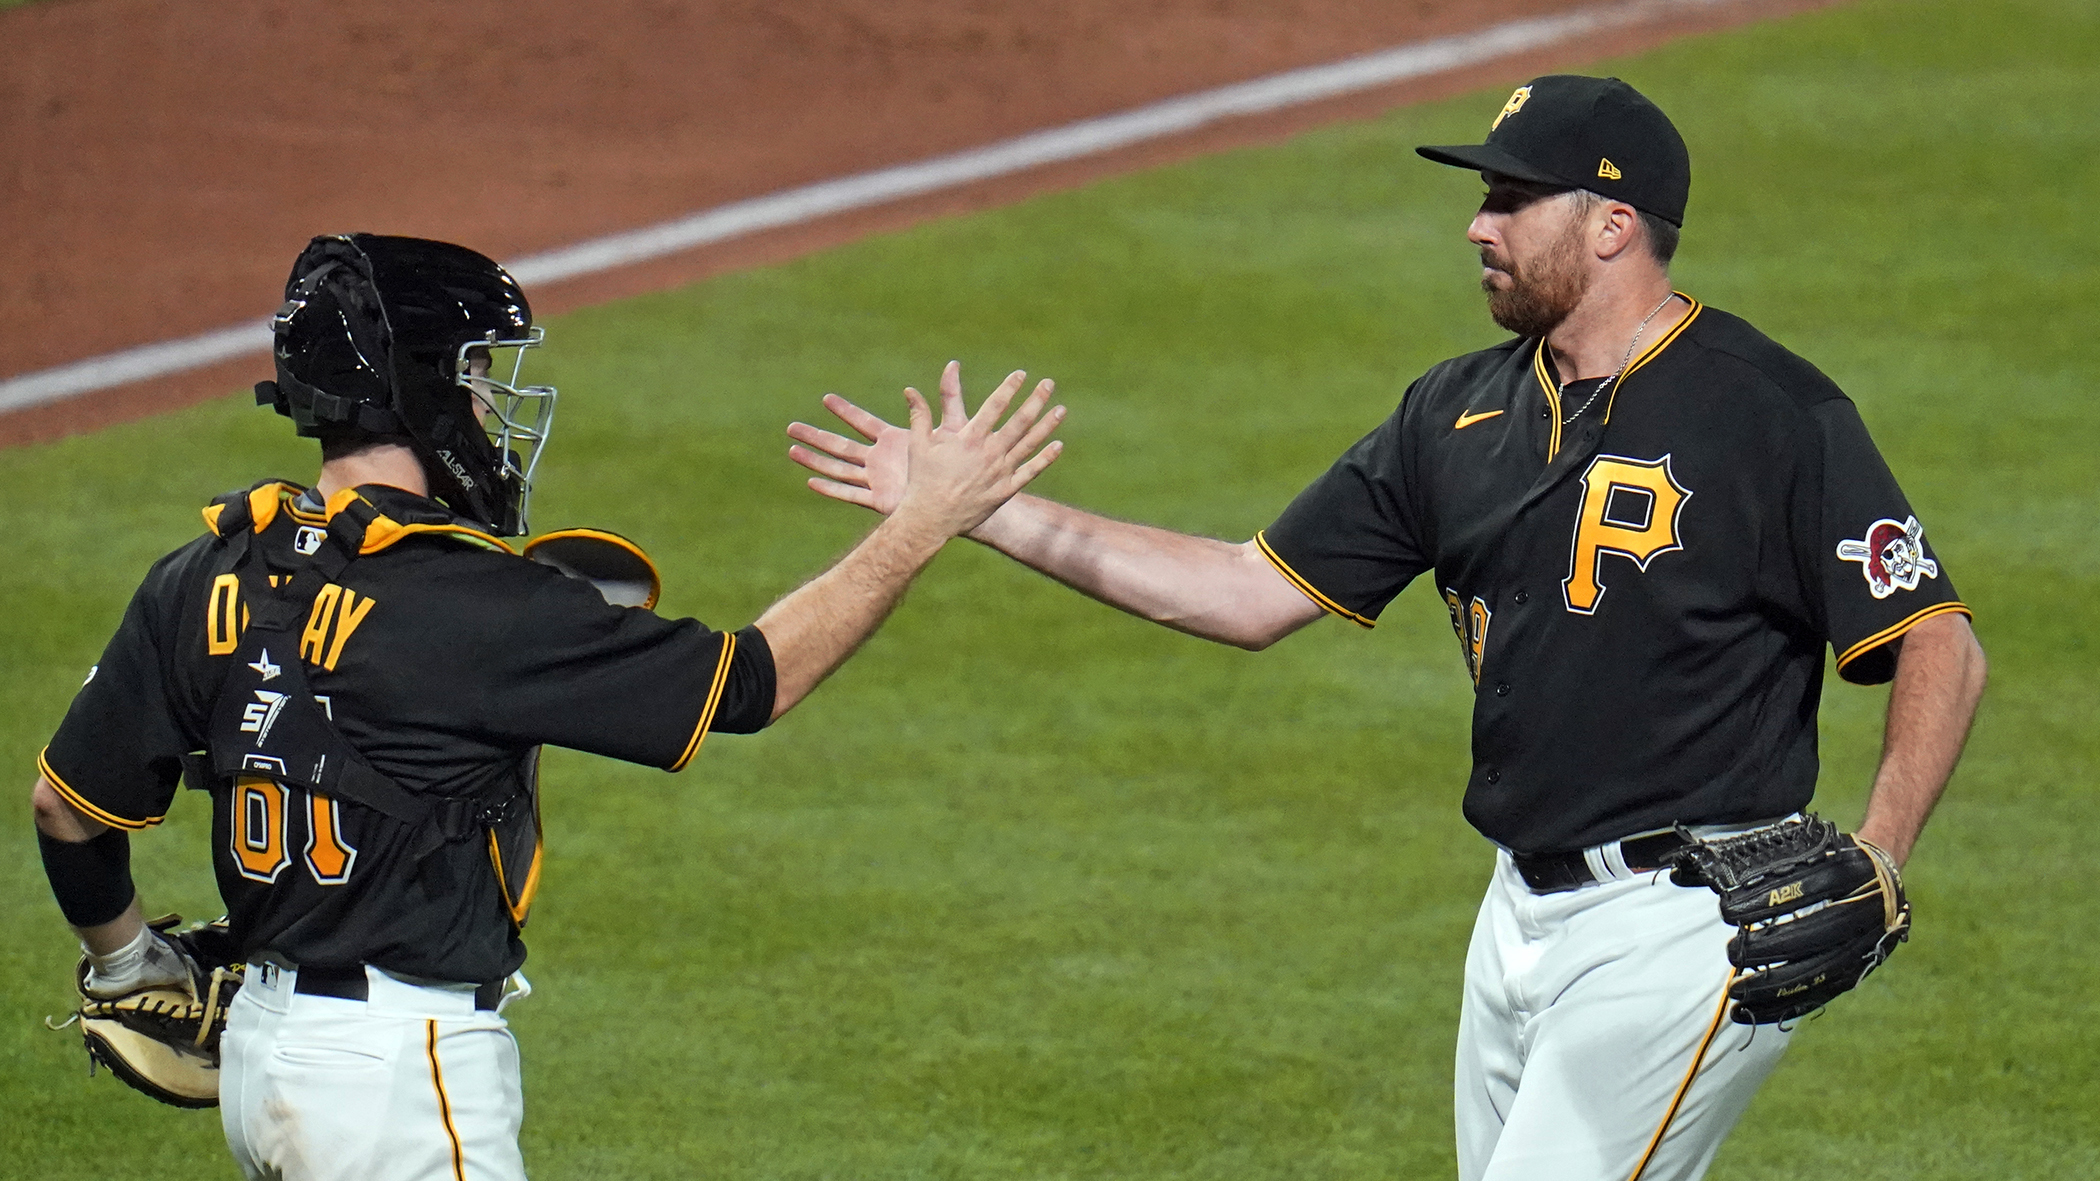 2019 Preview: Pittsburgh Pirates, PNC Park